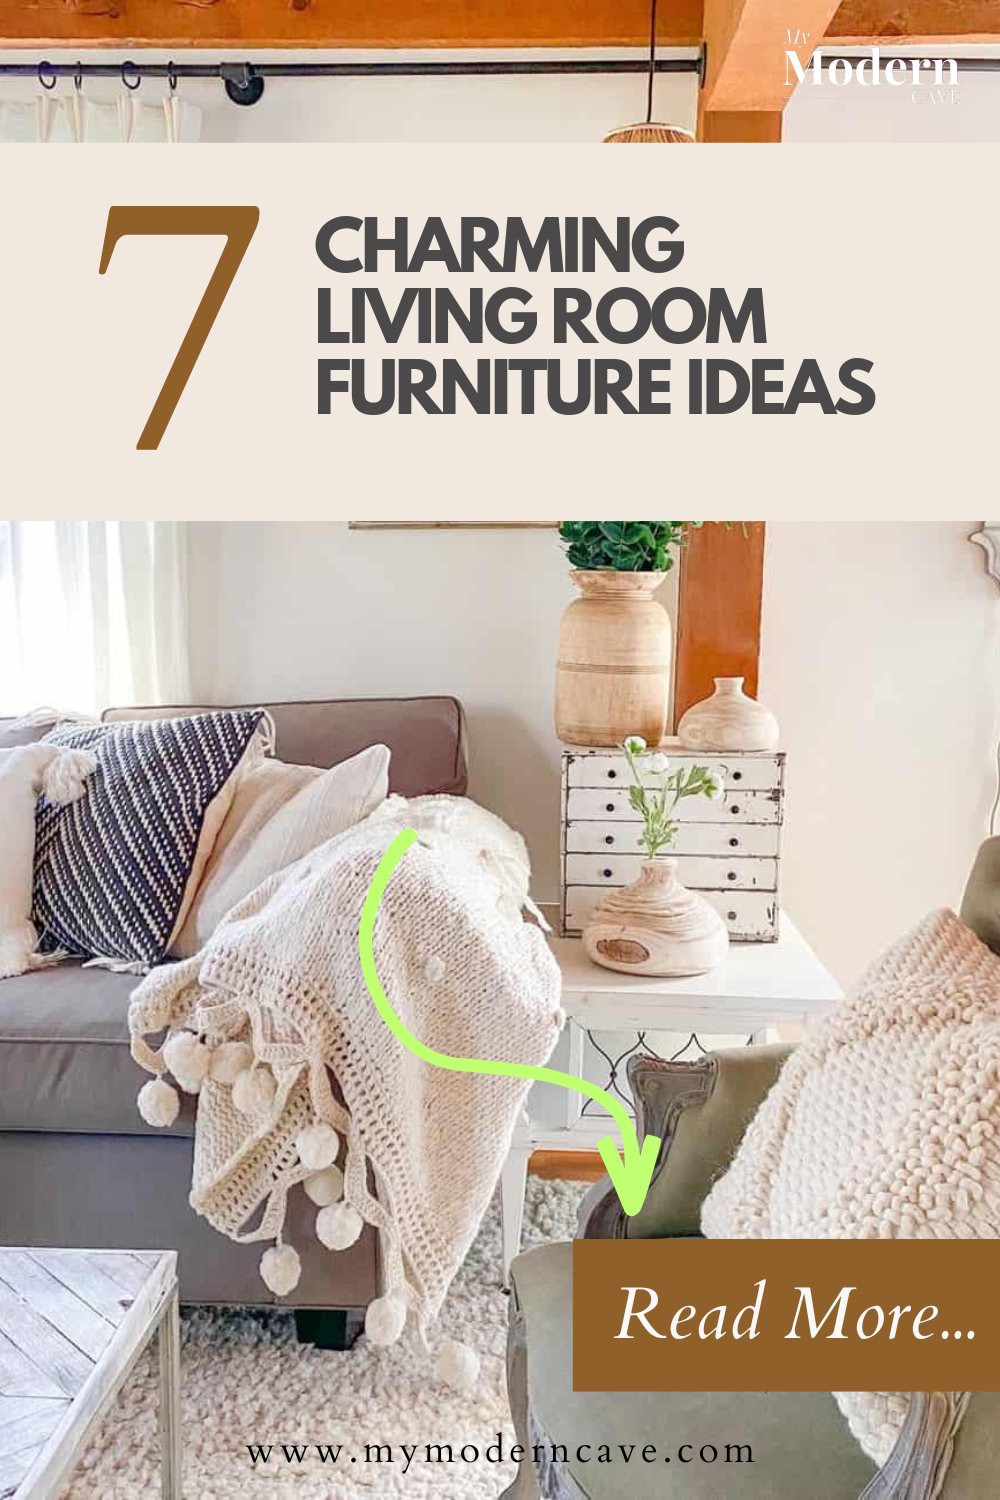 Living Room Furniture Ideas Infographic